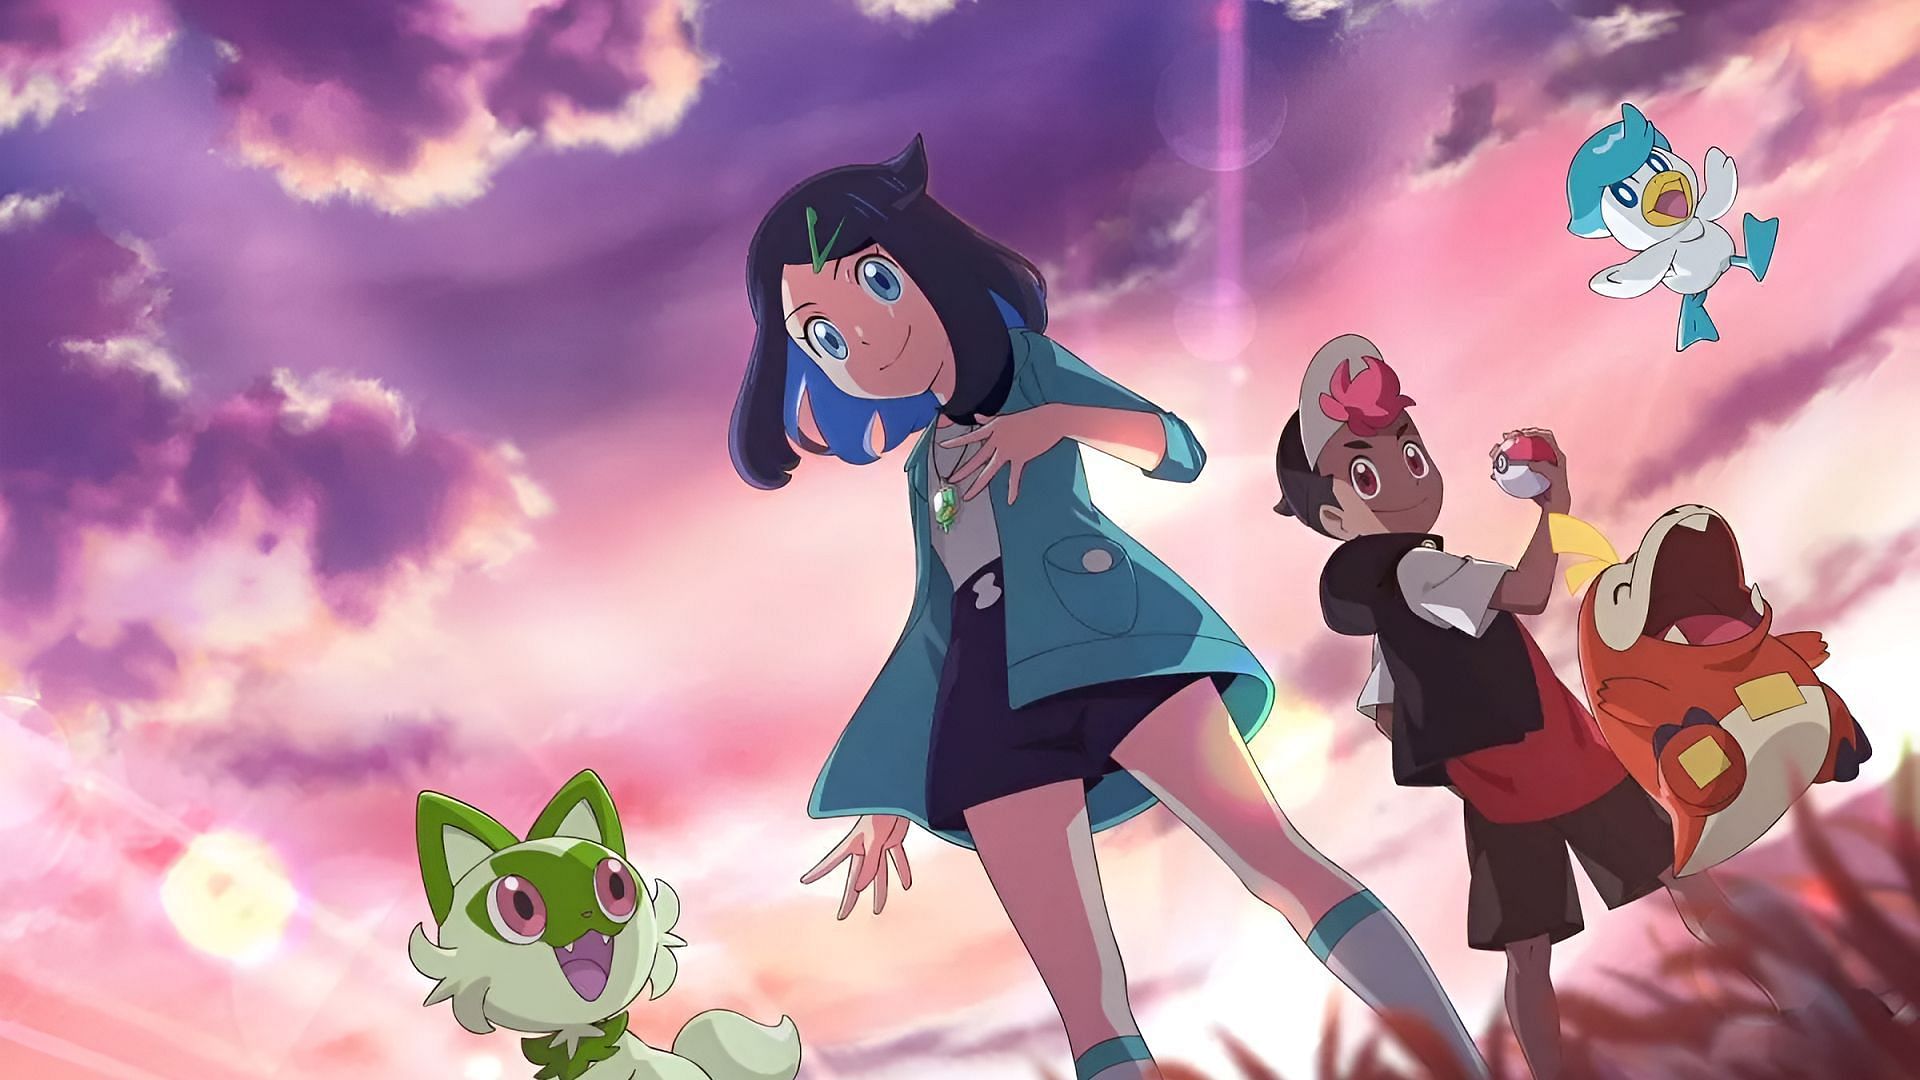 Pokemon Horizons is the newest ongoing anime series in the world of Pokemon.